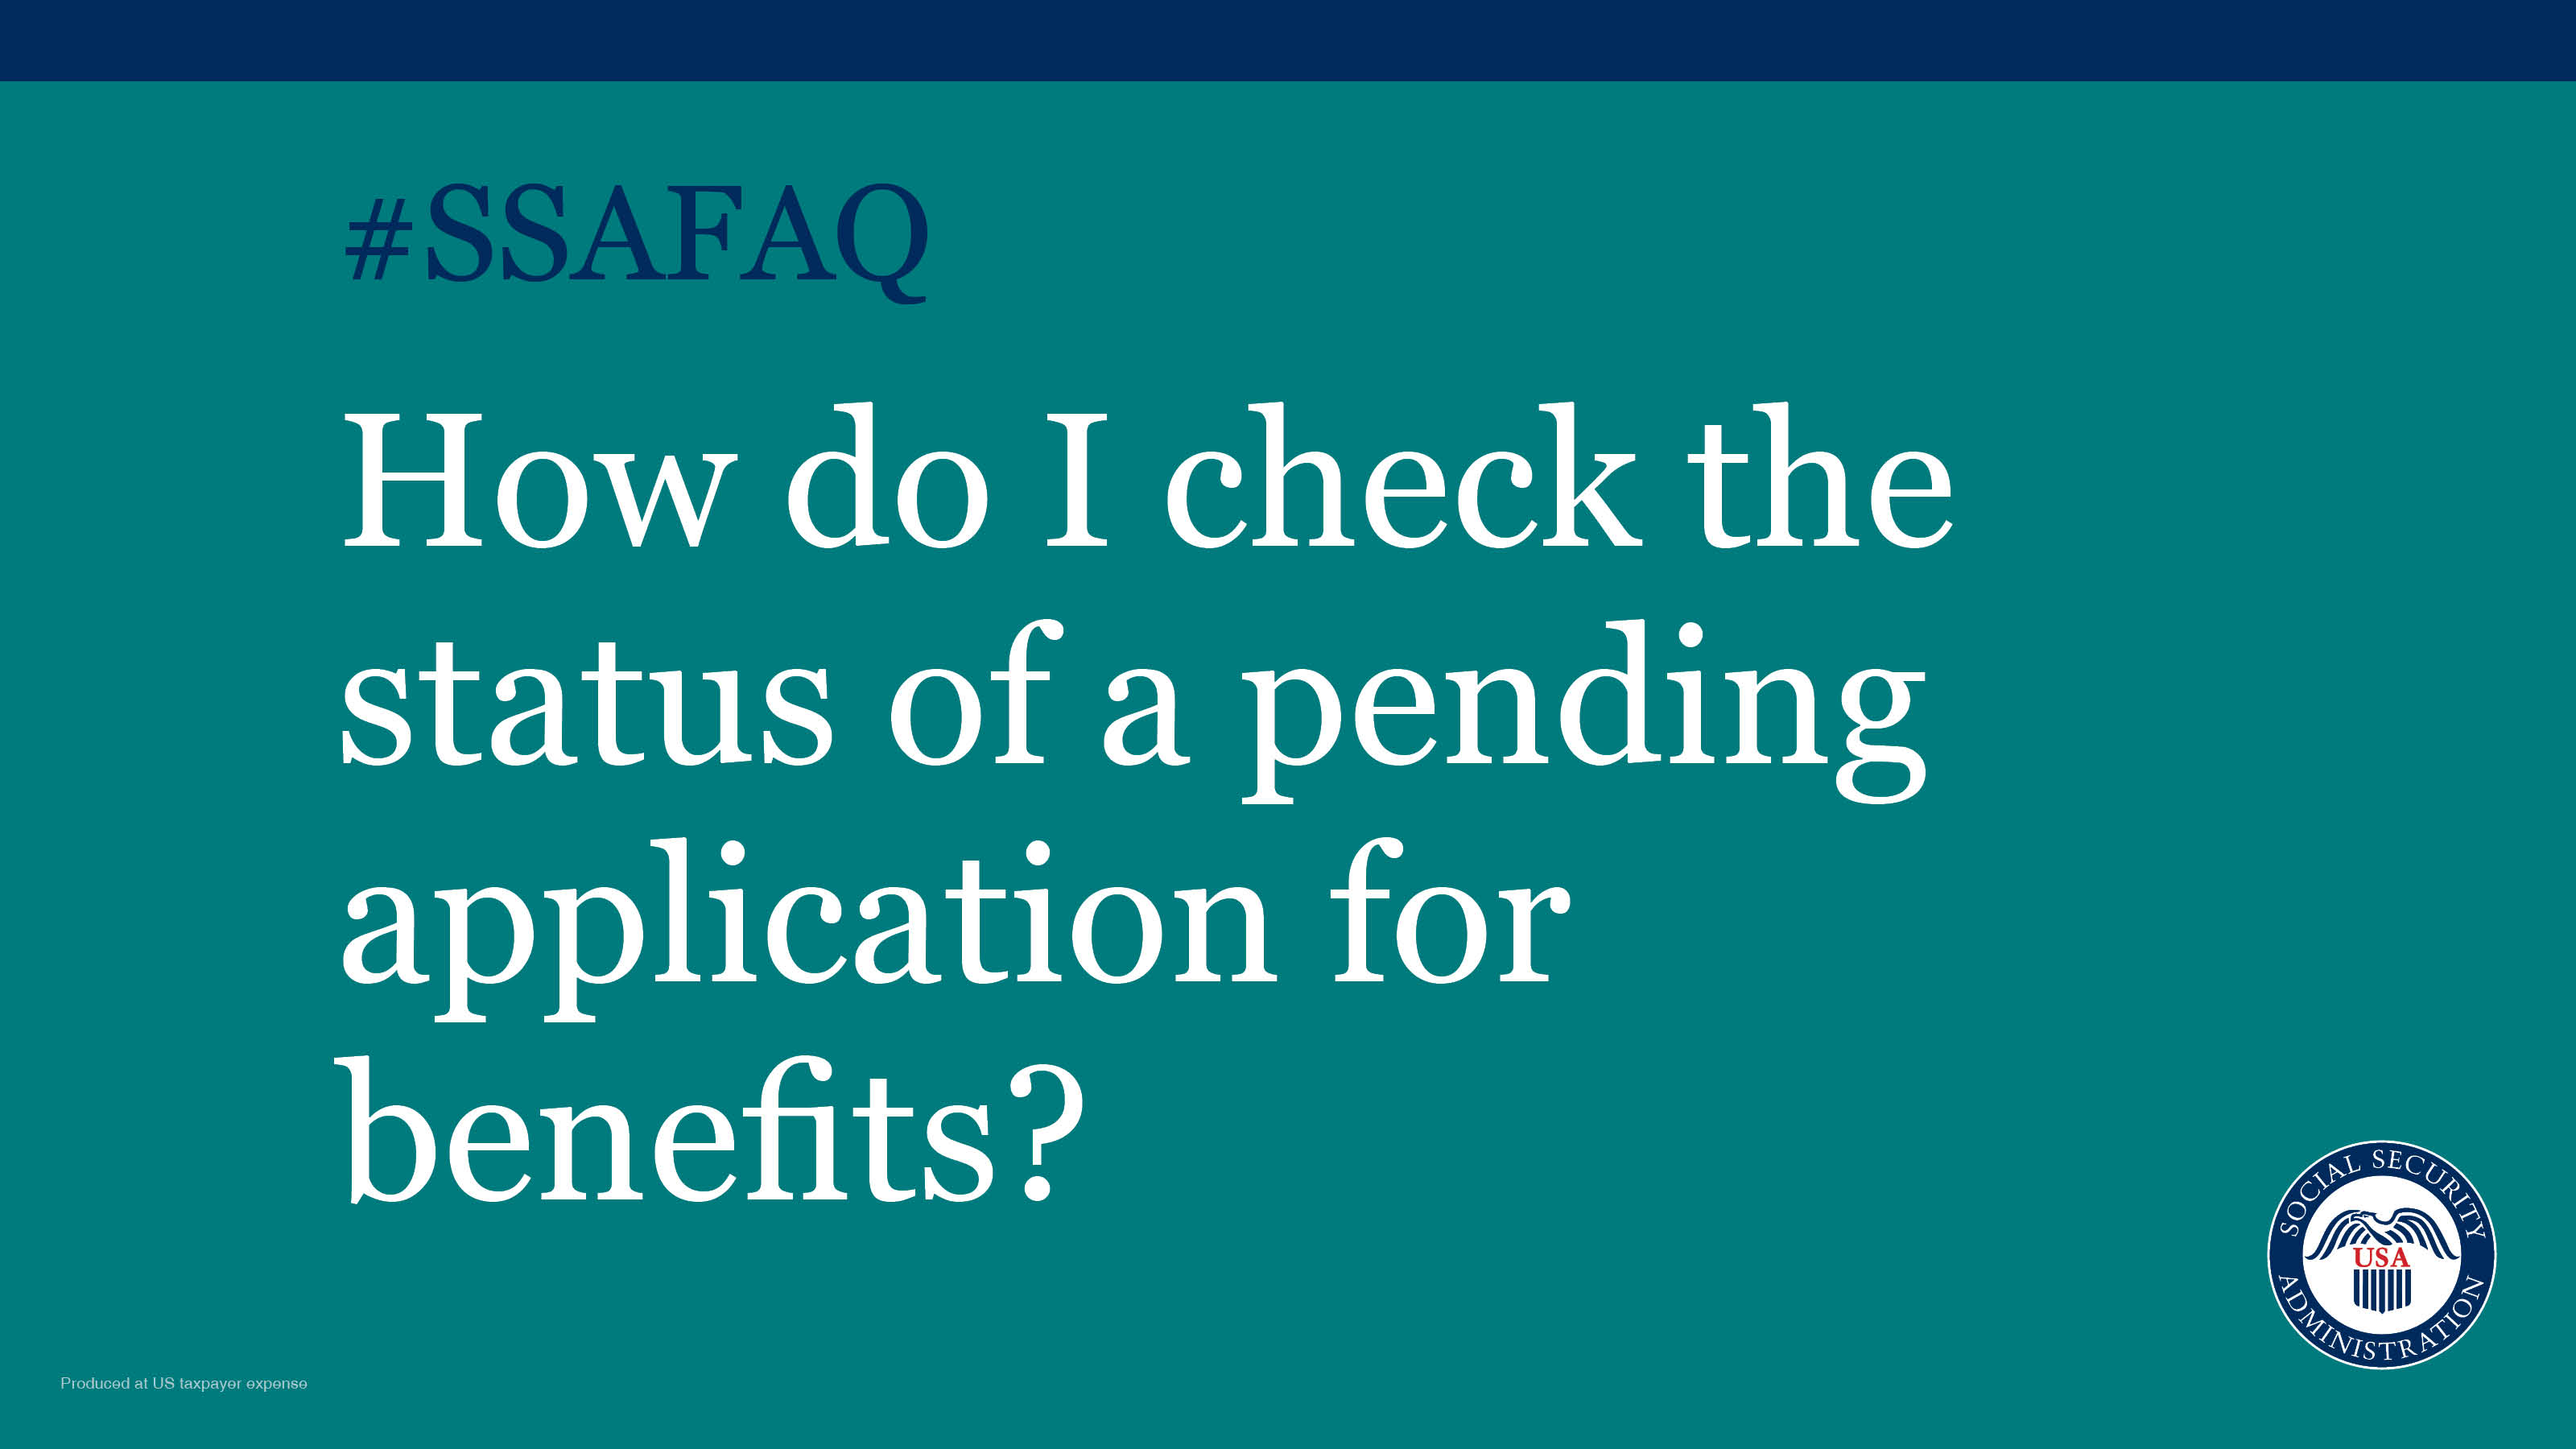 social-security-on-twitter-how-do-i-check-the-status-of-a-pending